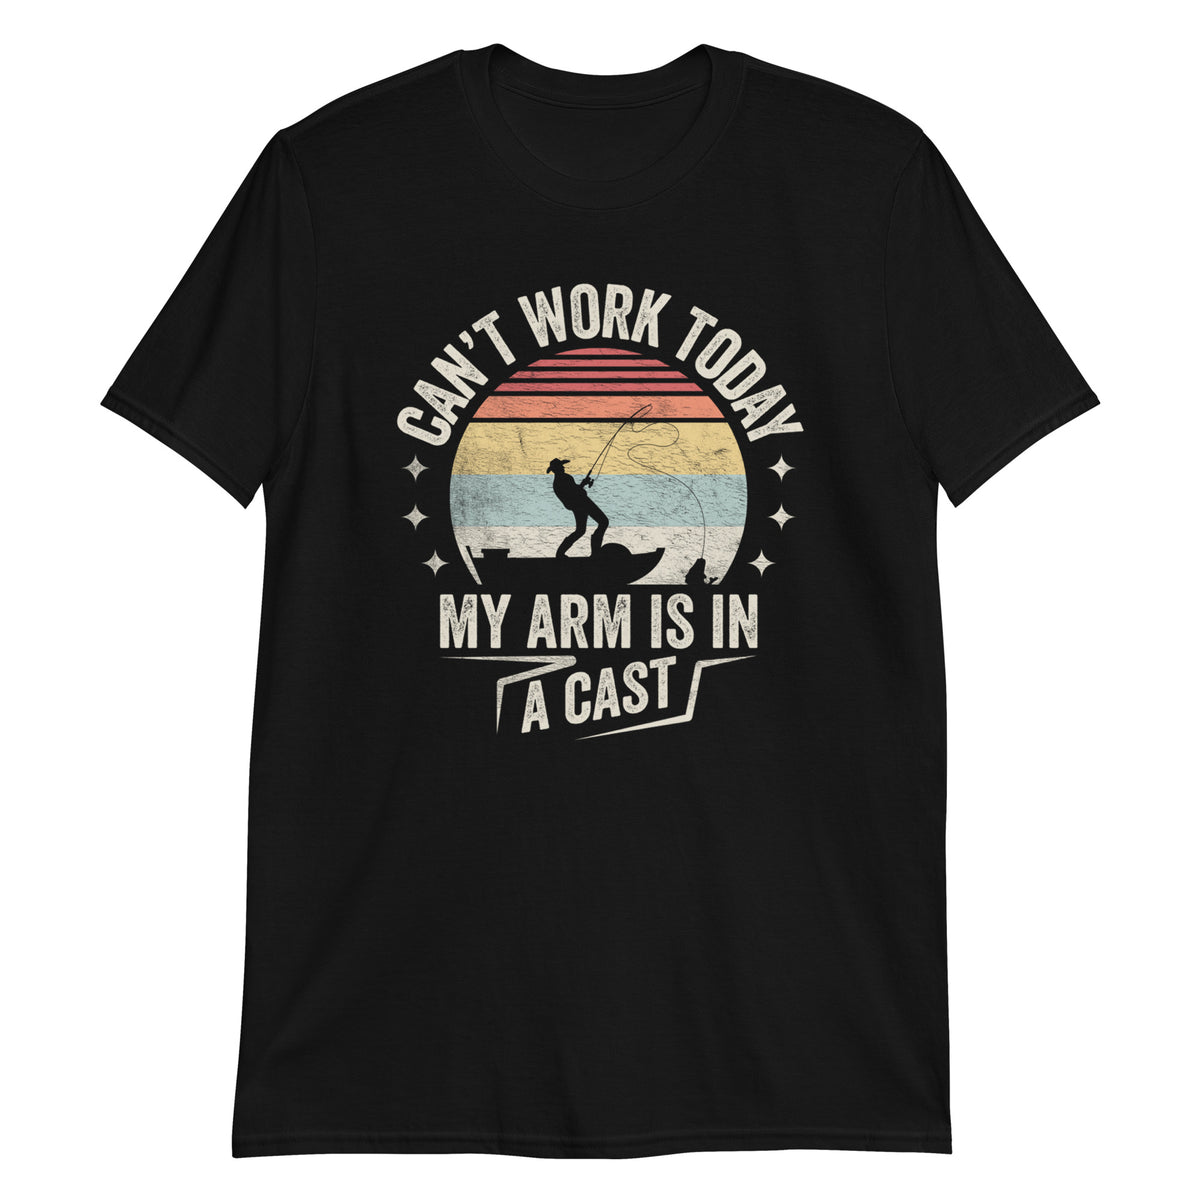 Can't Work Today My Arm Is in A Cast Funny Fishing T-Shirt